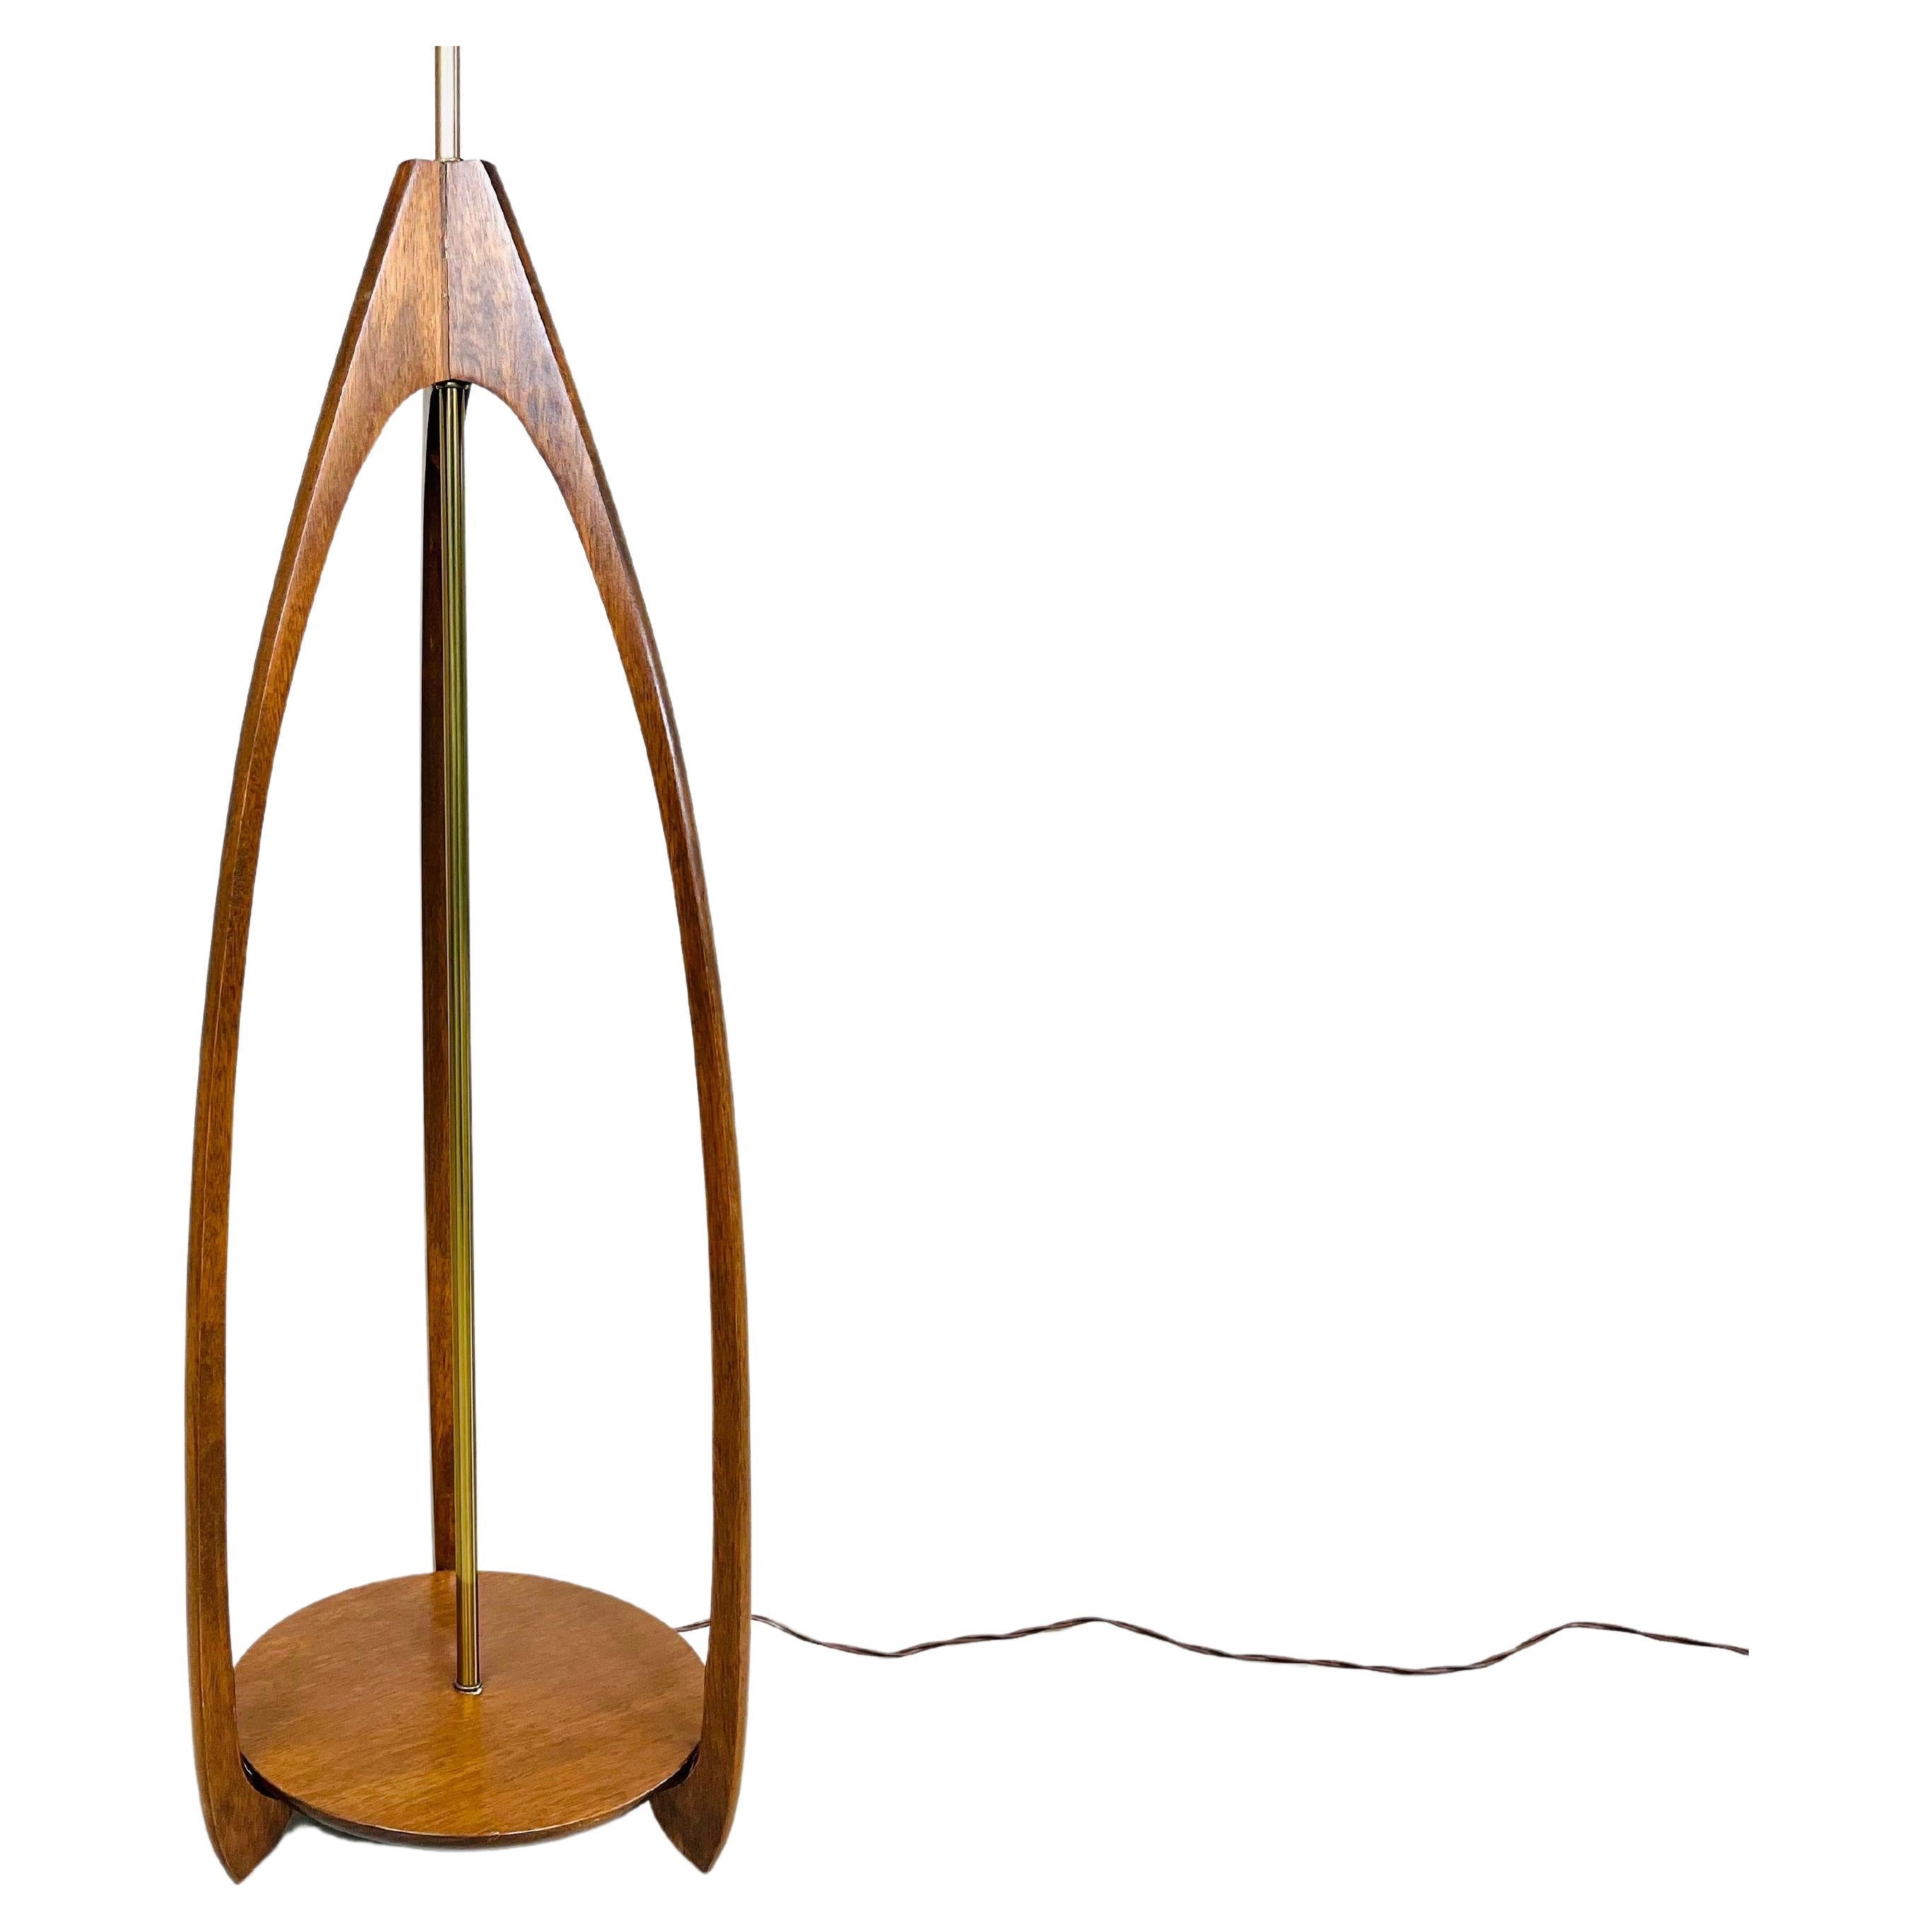 Tan France Auction Pick

A beautiful sculptural floor lamp by Modeline in the matter of Adrian Pearsall having walnut base with brass hardware. This piece is simple and elegant having an atomic design that was signature in the 1960s when it was